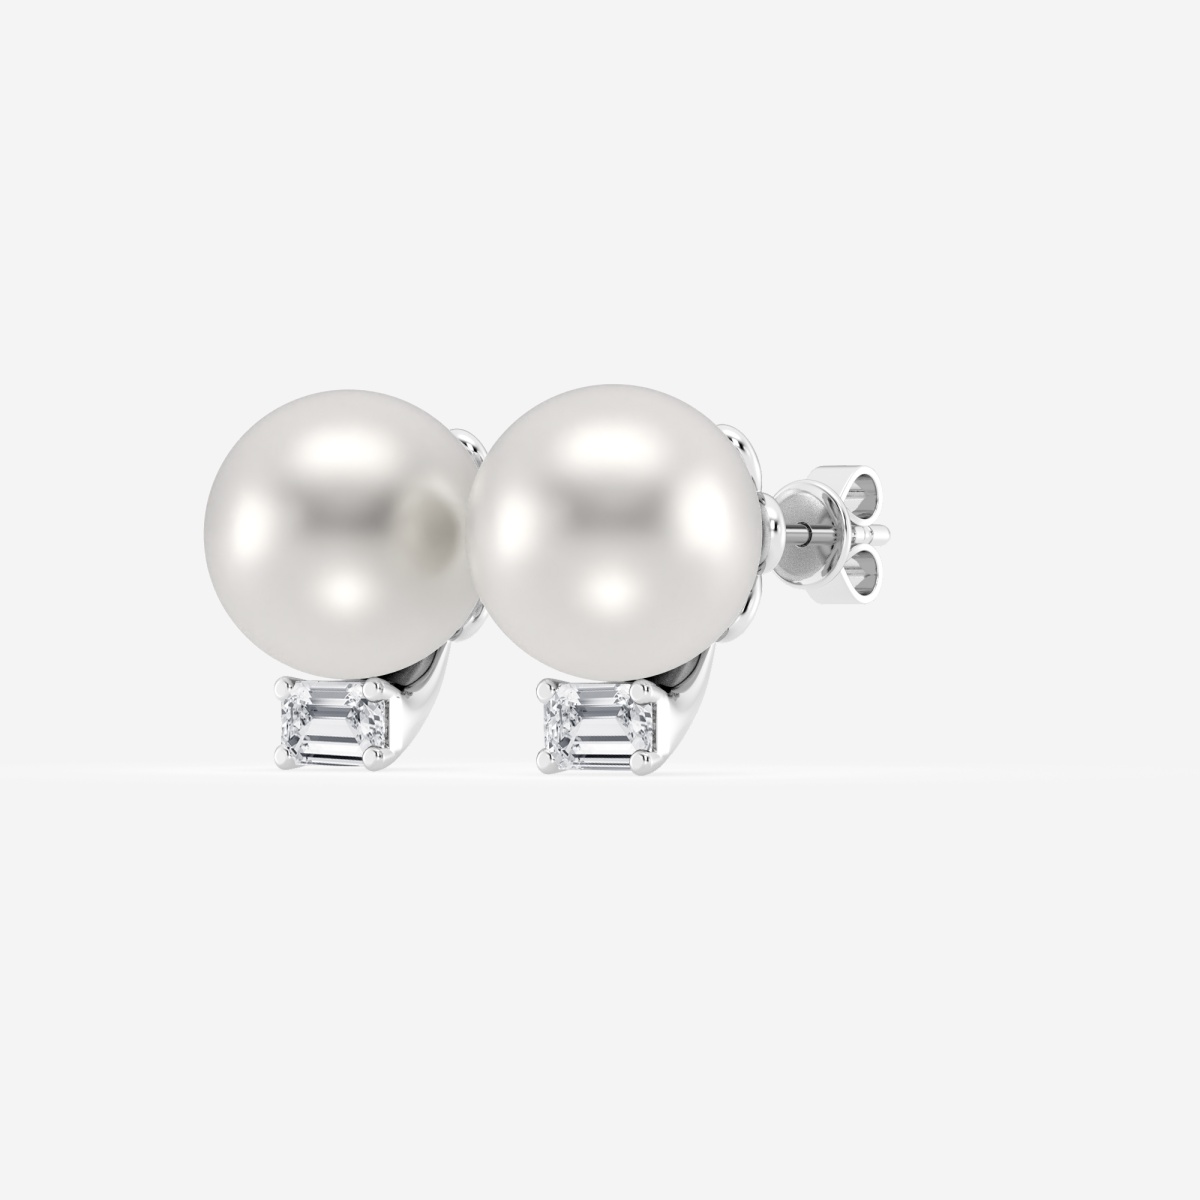 Additional Image 1 for  9.5 - 10.0 mm Cultured Freshwater Pearl and 1/2 ctw Lab Grown Diamond Stud Earrings